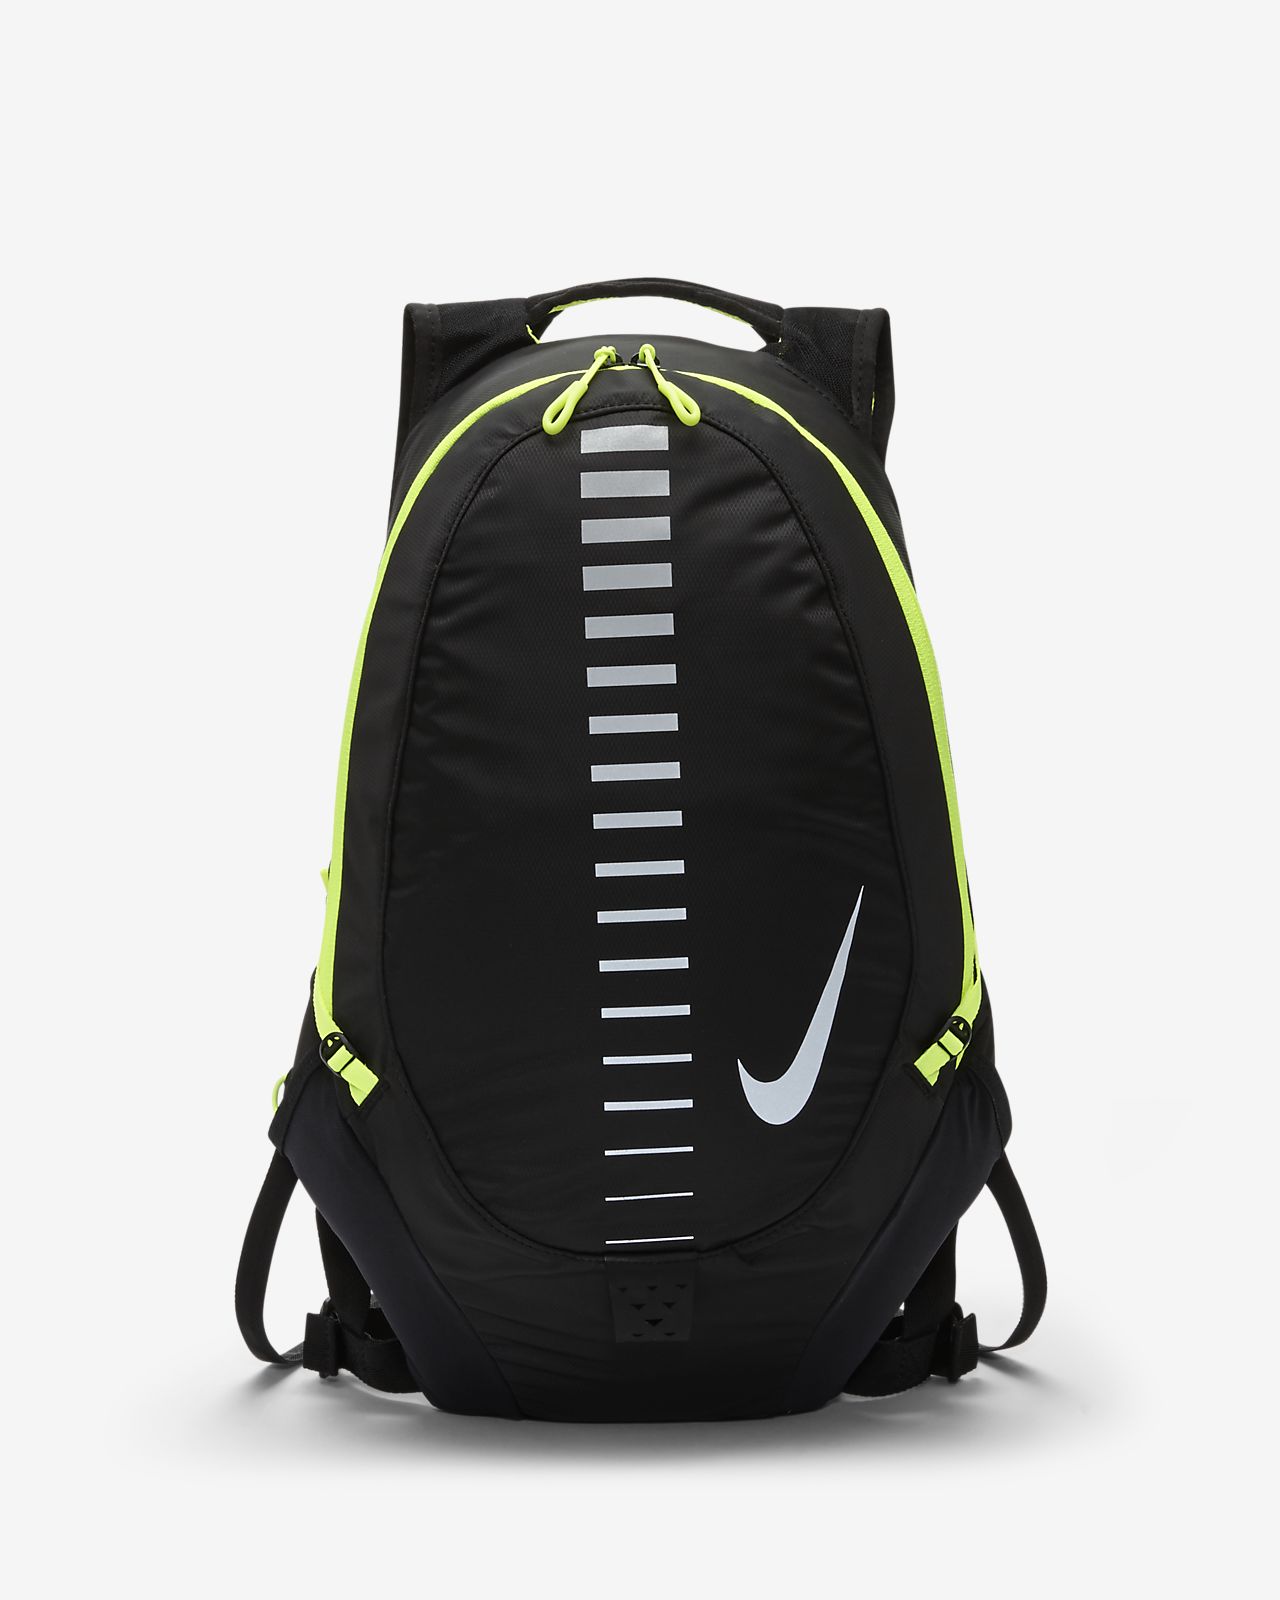 [NIKE Official]Nike Run Backpack.Online store (mail order site)